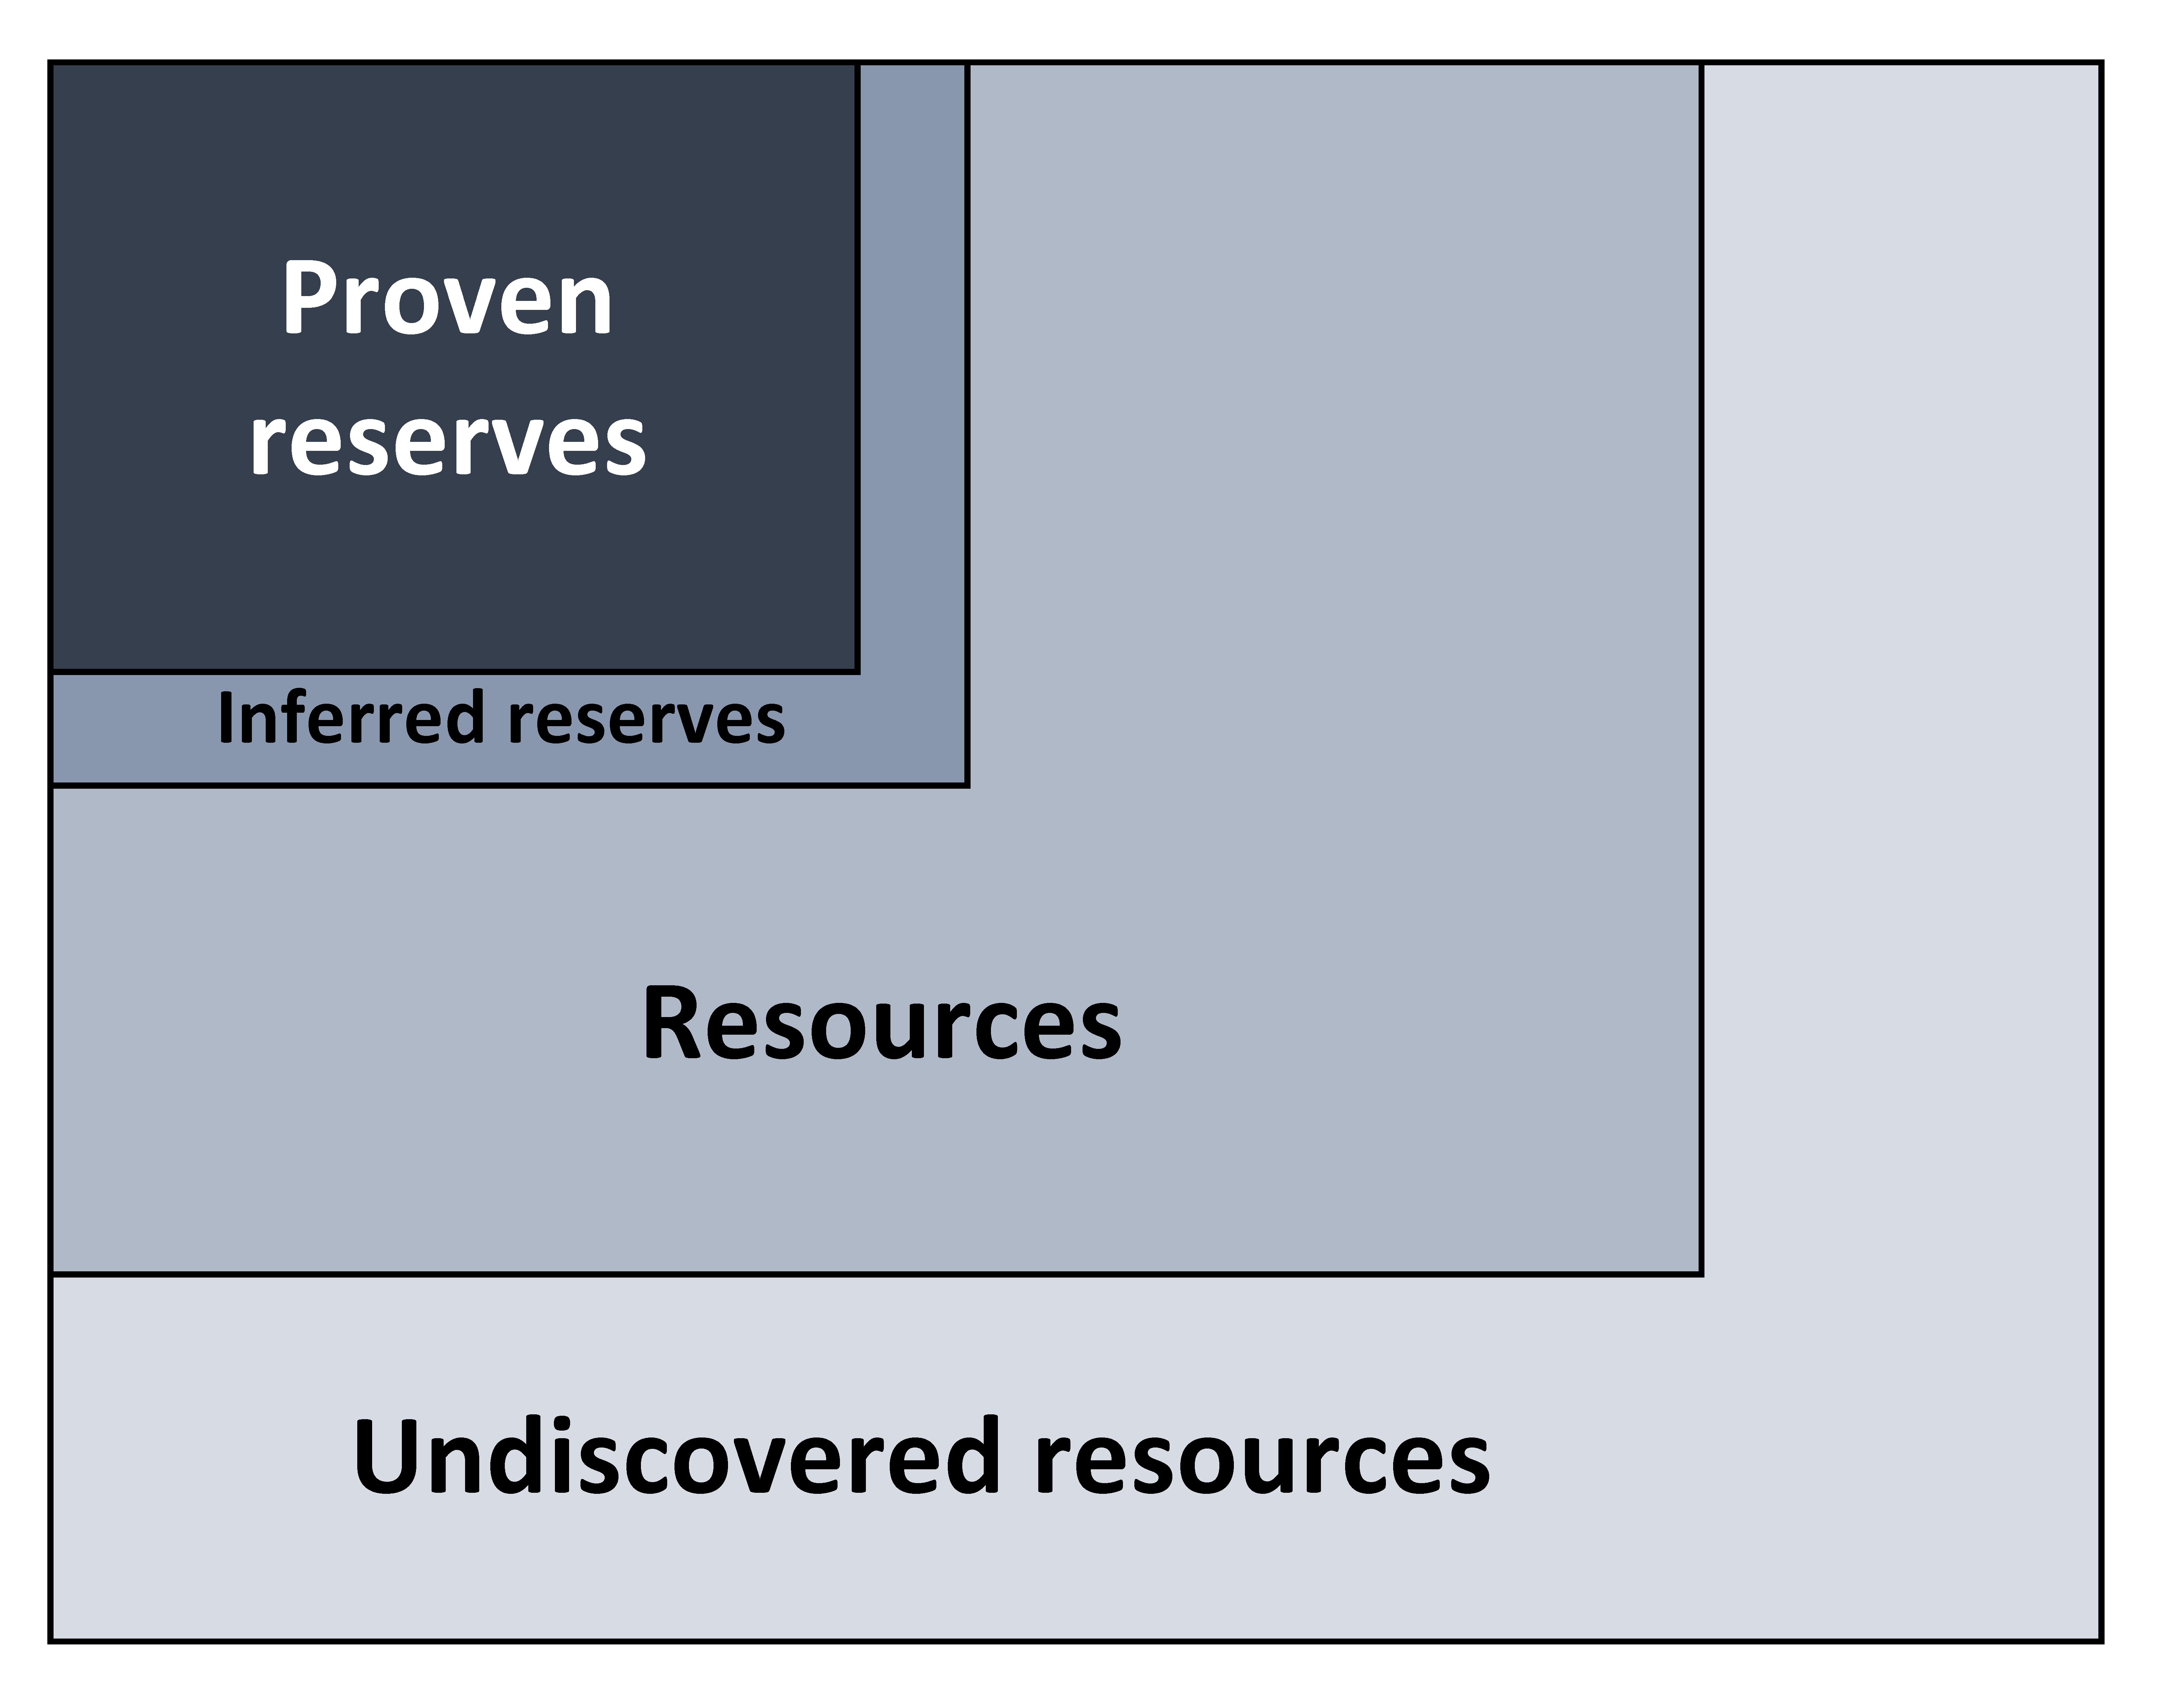 Diagram shows the small box of "reserves" within a larger box of "resources". There is also an "inferred resources" box that is slightly larger than "proven reserves" box and an "undiscovered resources" box slightly larger than the resources box.